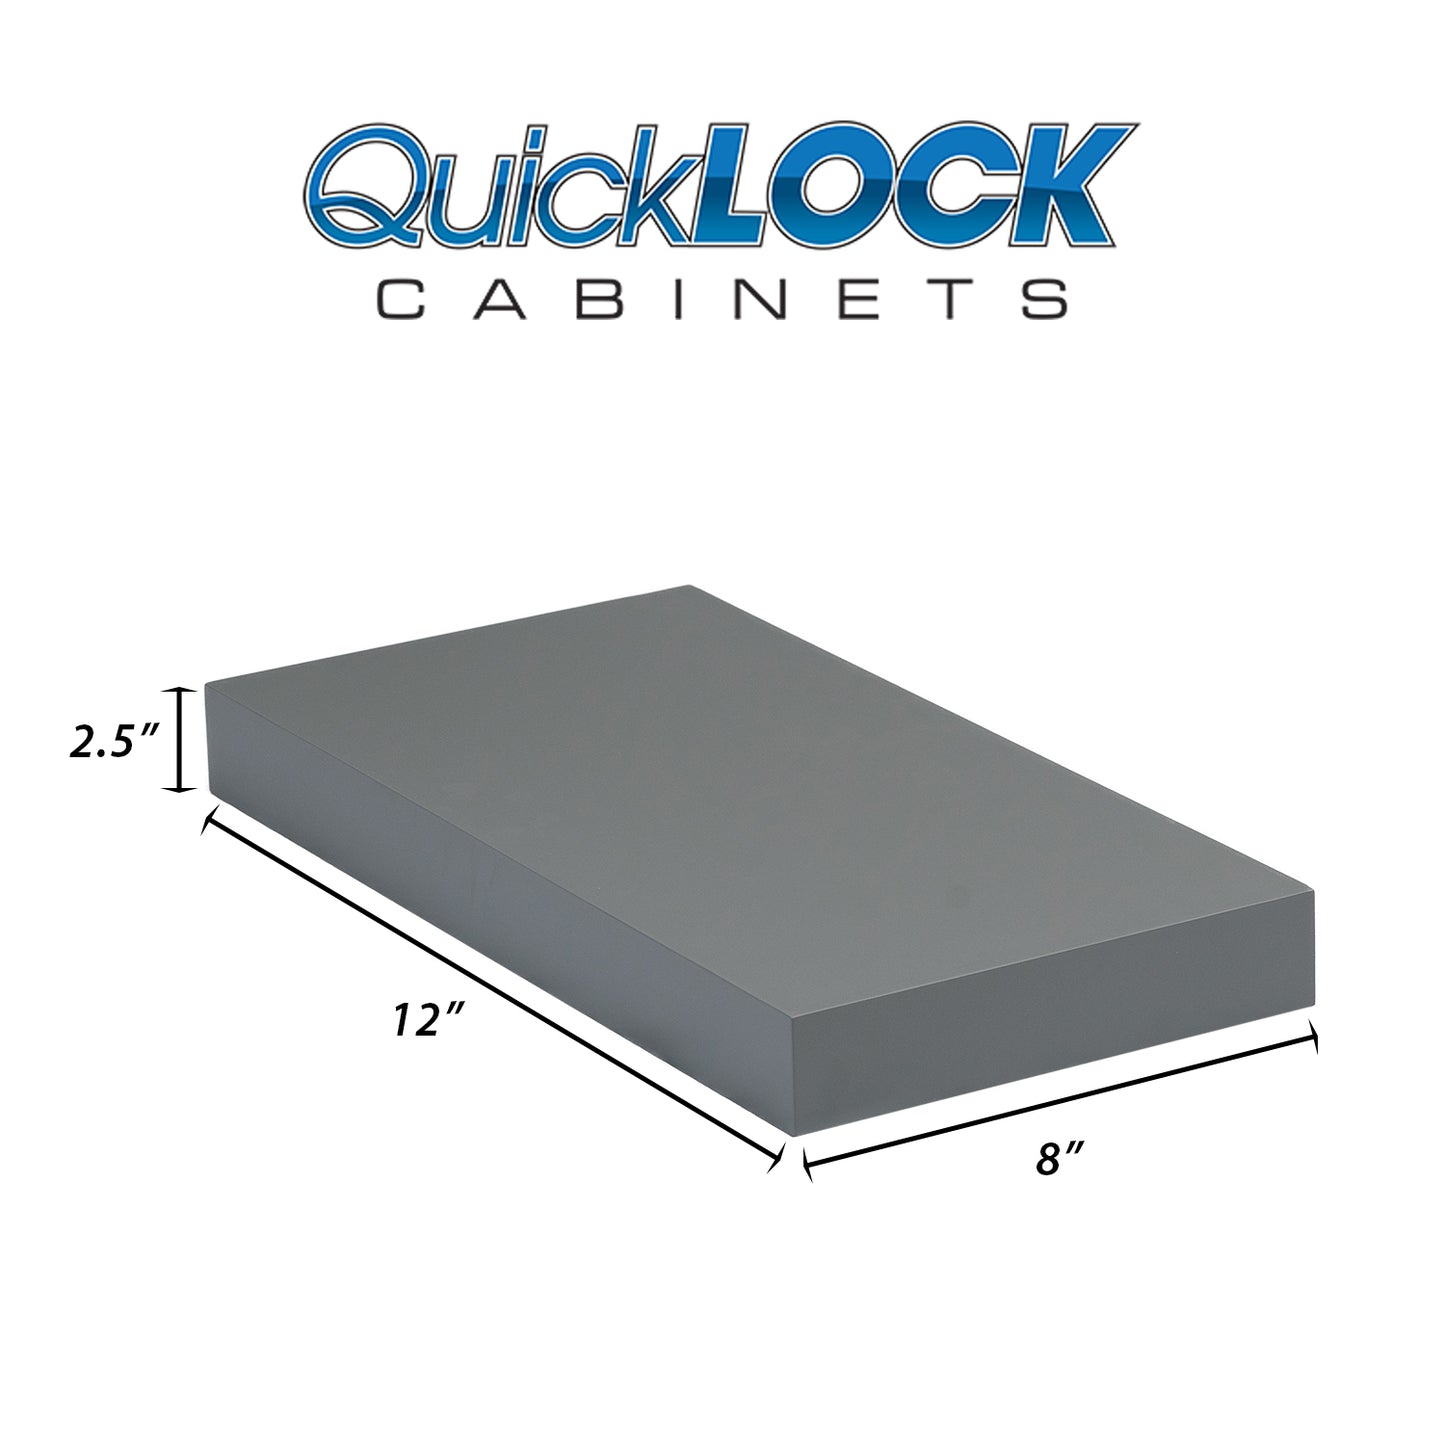 Quicklock Cabinets Floating Shelves | 2.5" Thick | Magnetic Gray, 8" D x 12" W x 2.5" H | American Made | Hardwood Bracket | Complete Shelf Unit